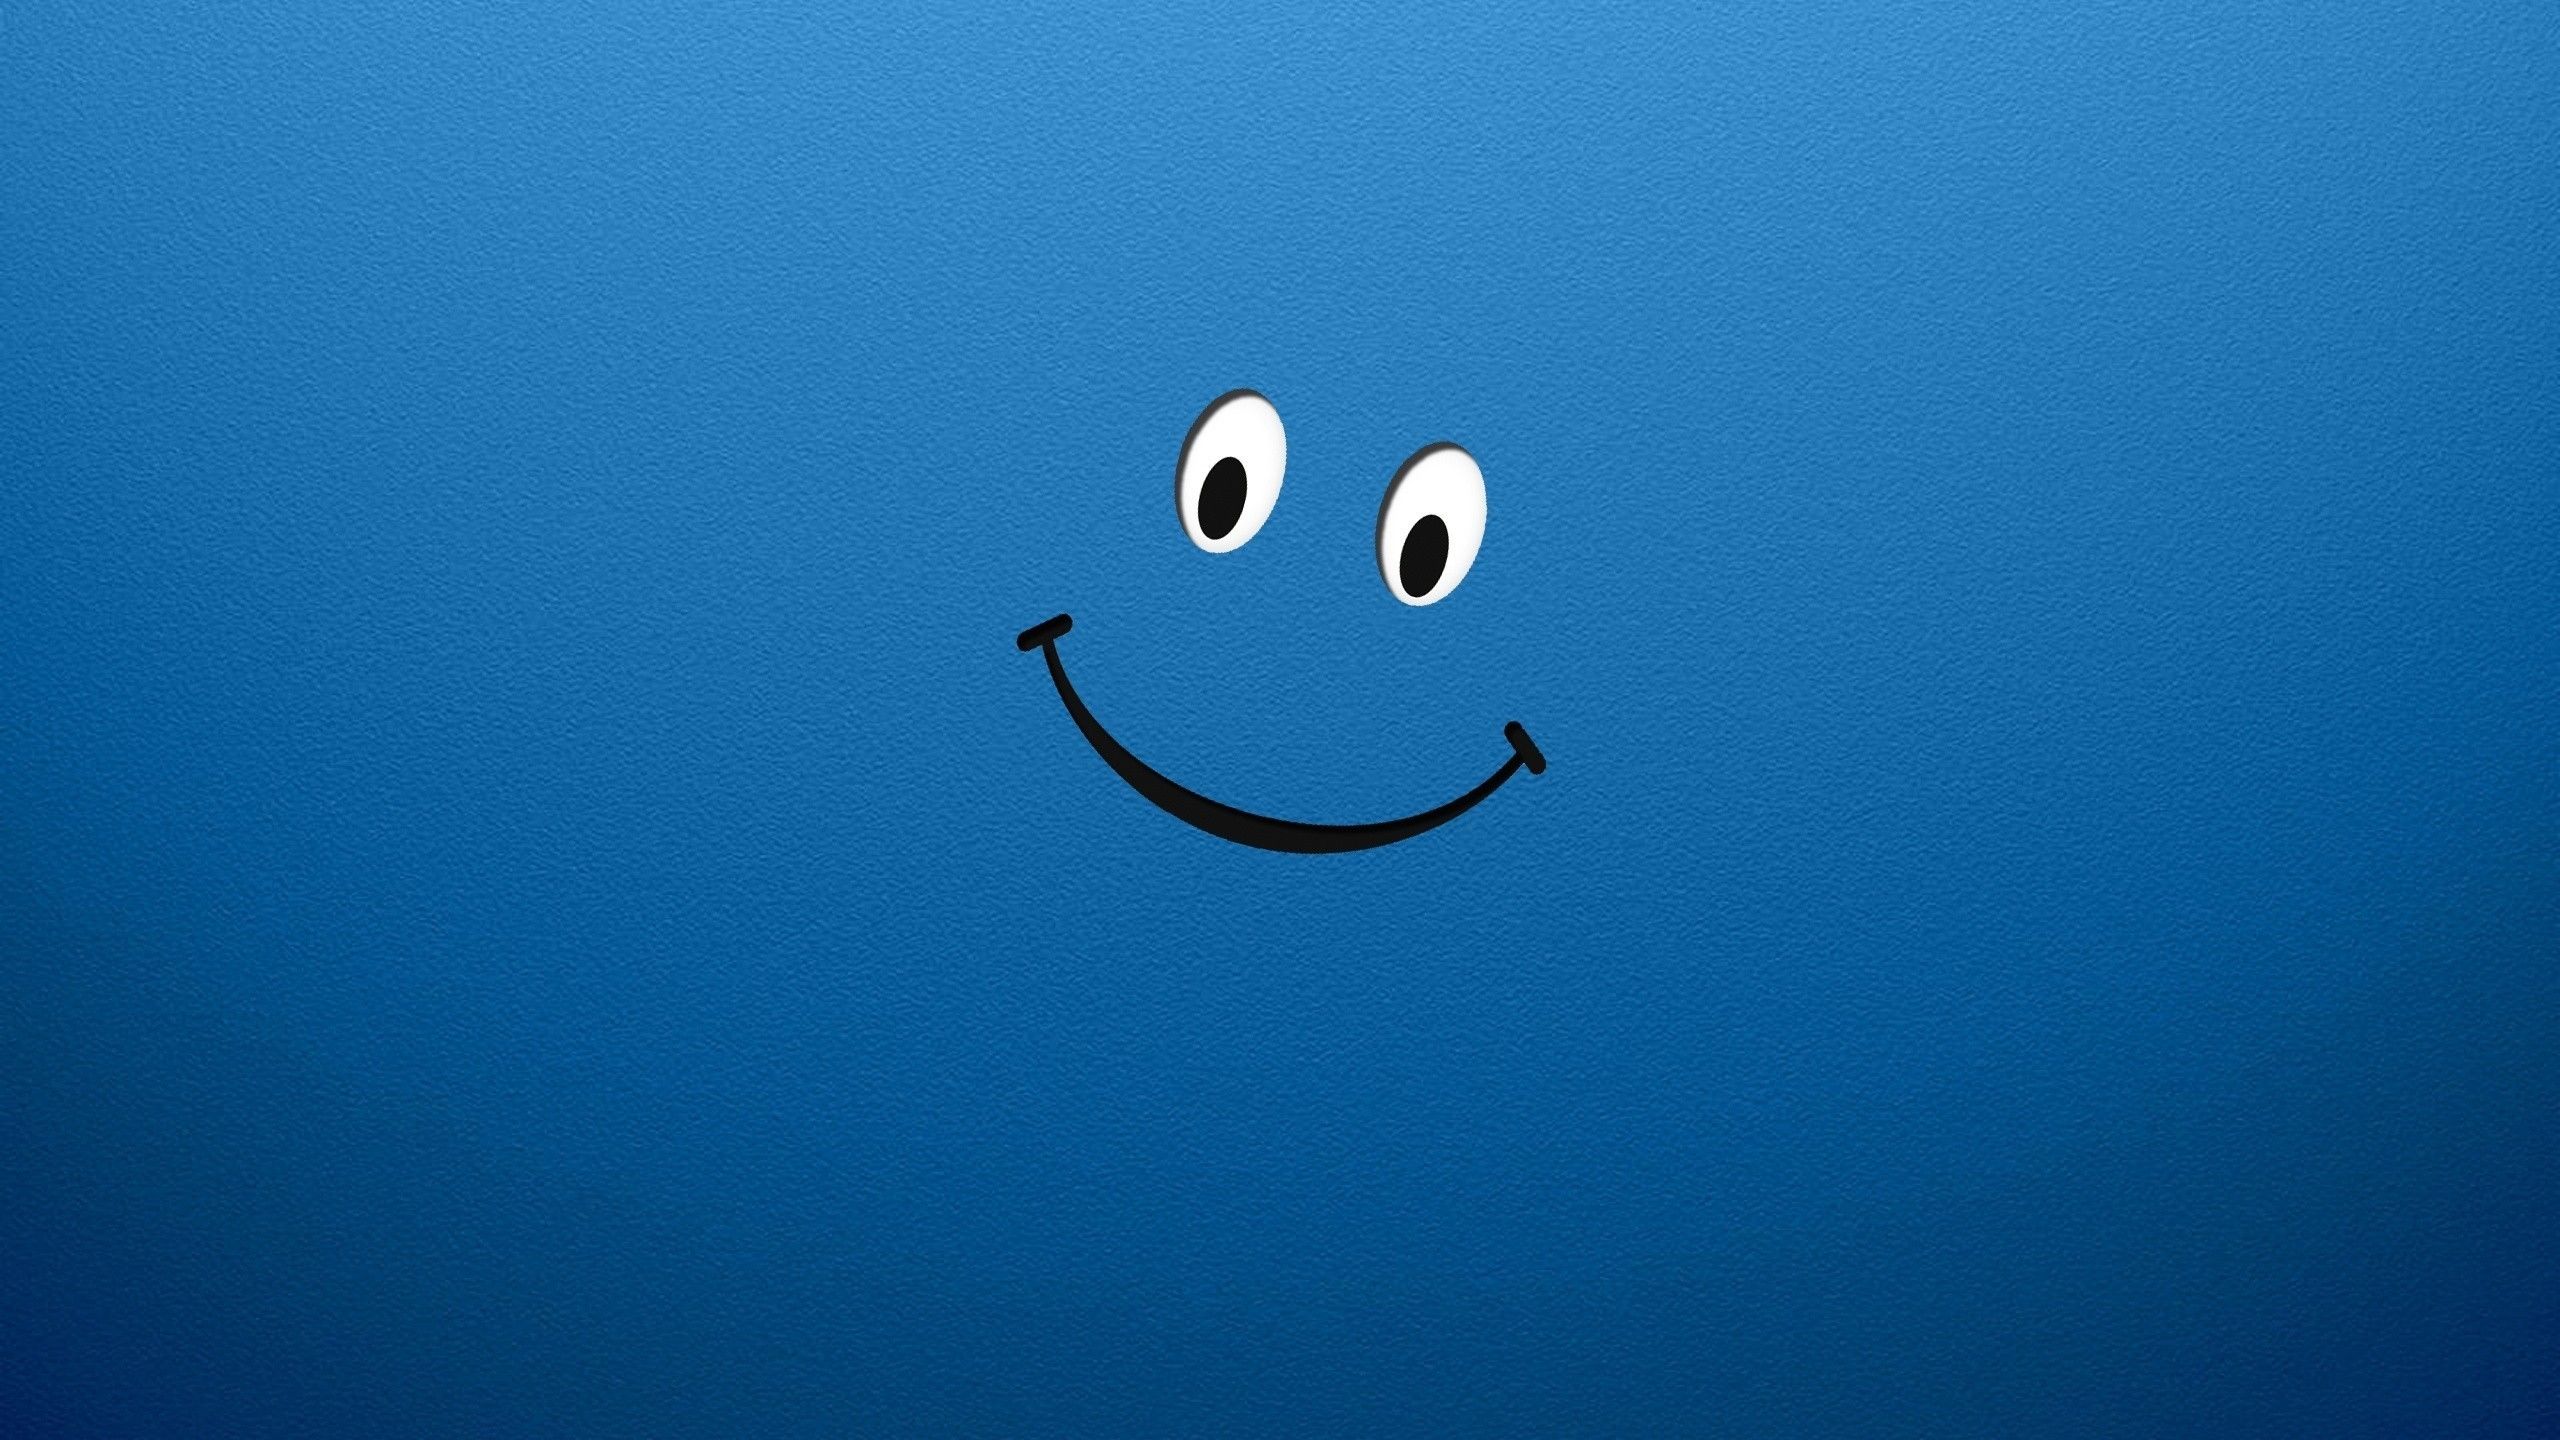 Free Be Happy Picture, Cartoon Be Happy Wallpaper